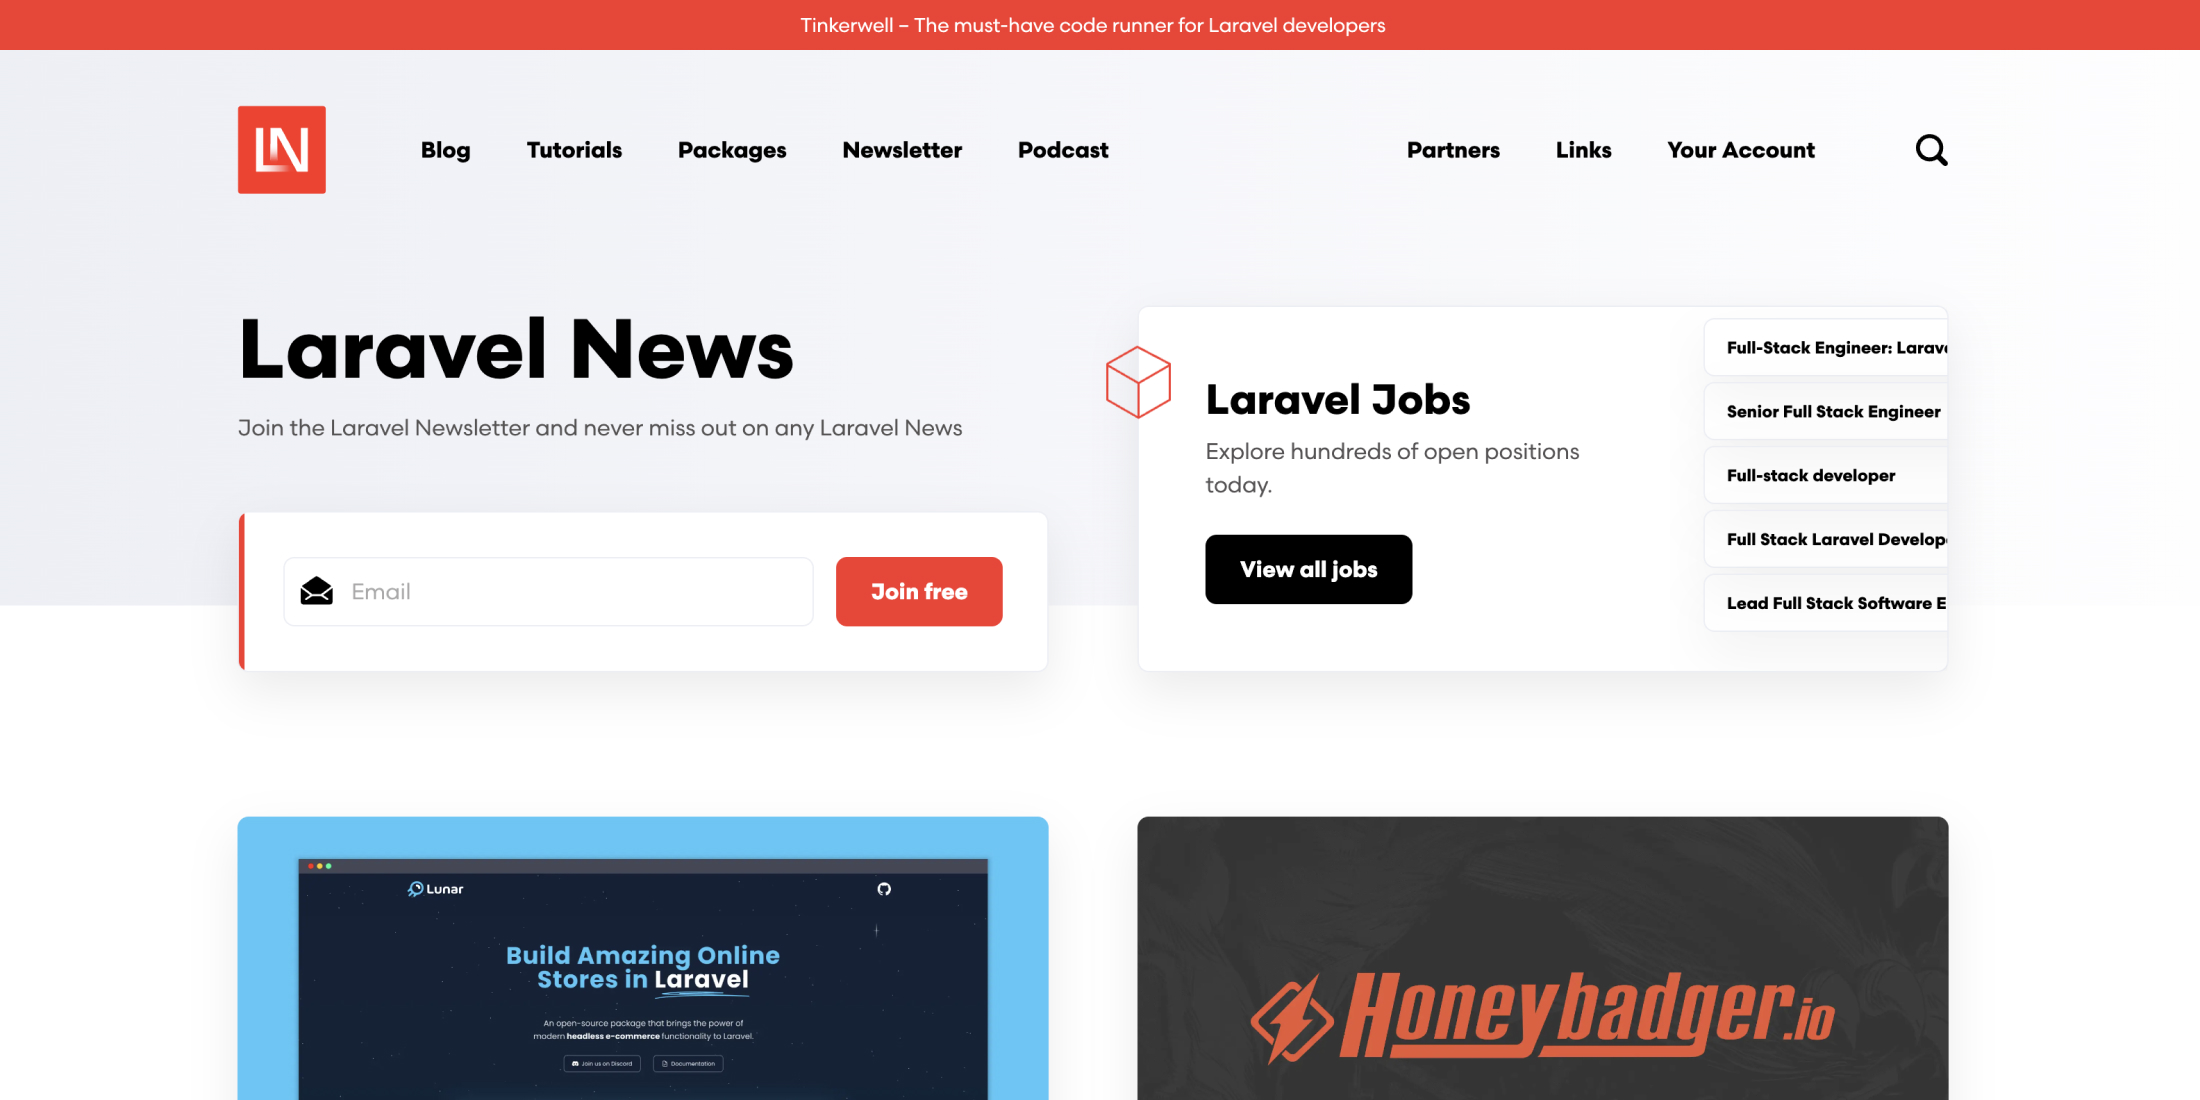 Welcome to the next version of Laravel News